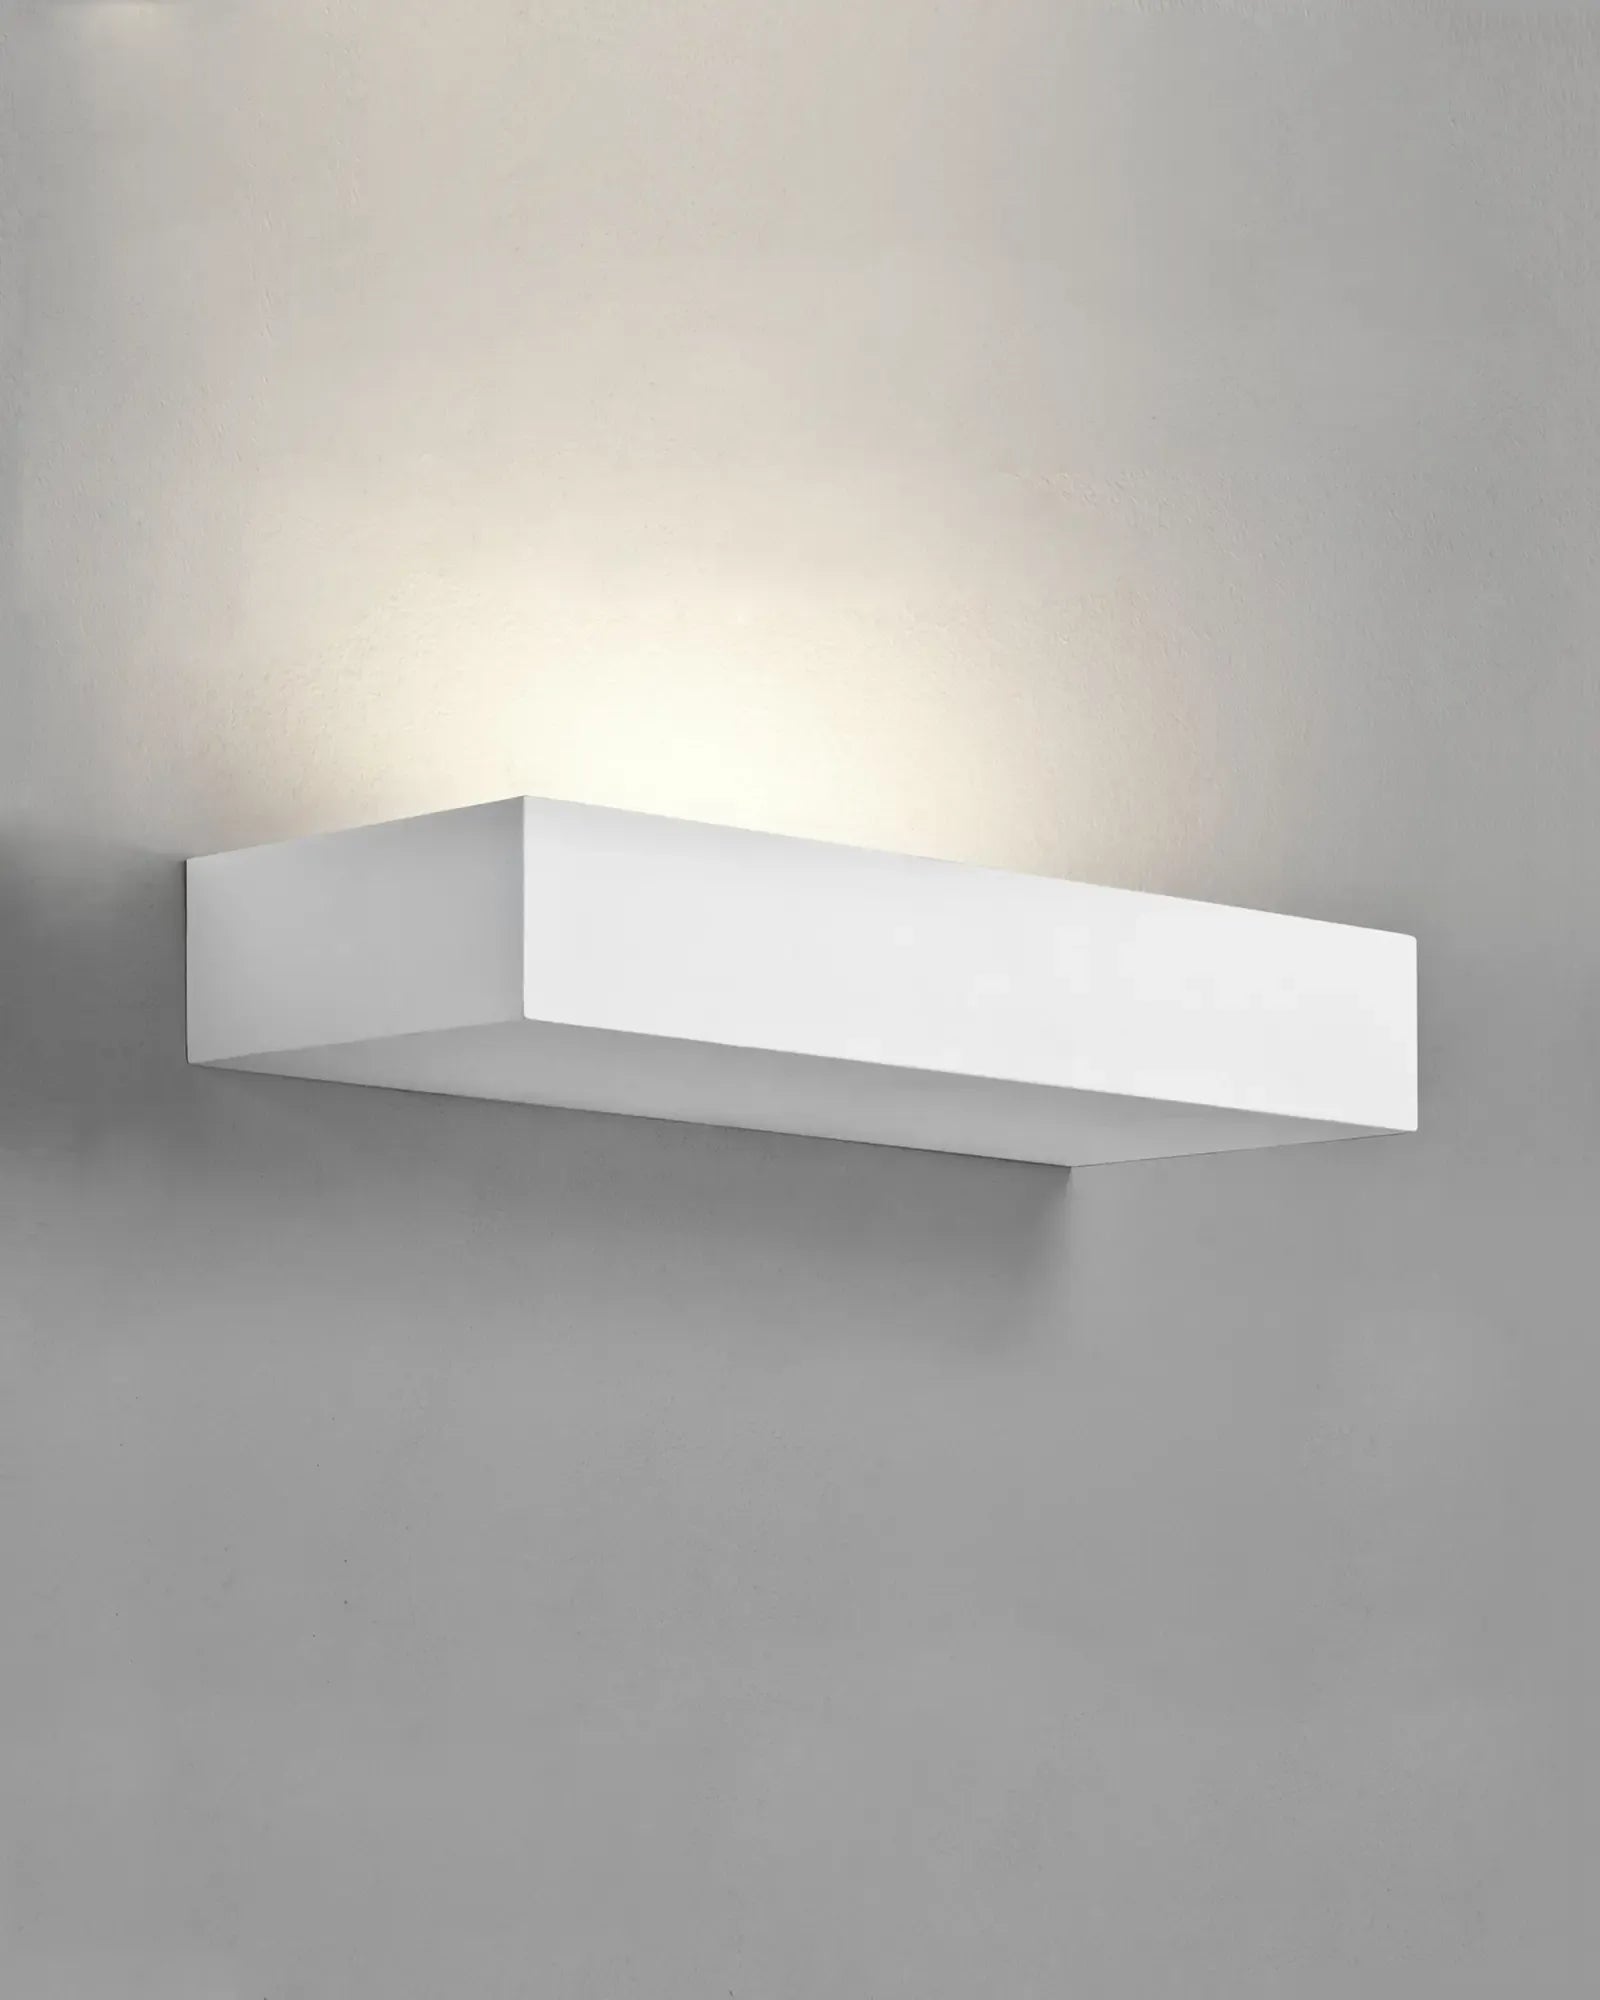 Parma 200 minimalistic plaster rectangular wall light by Astro Litghting | Nook Collections